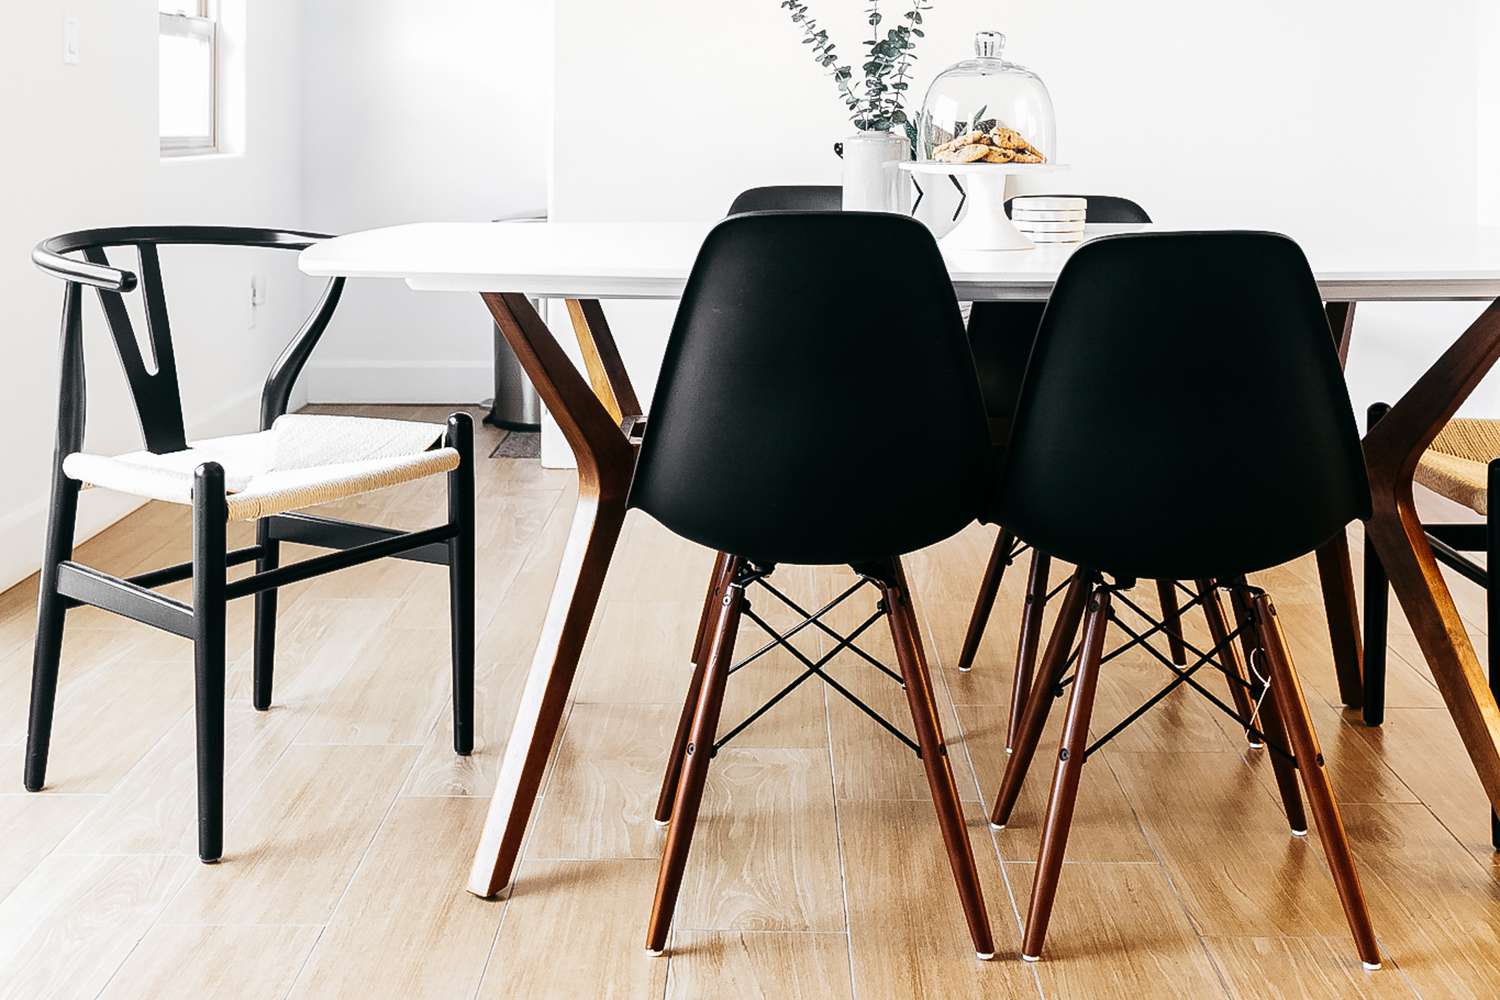 Black Eames molded side chairs surrounding white dining table